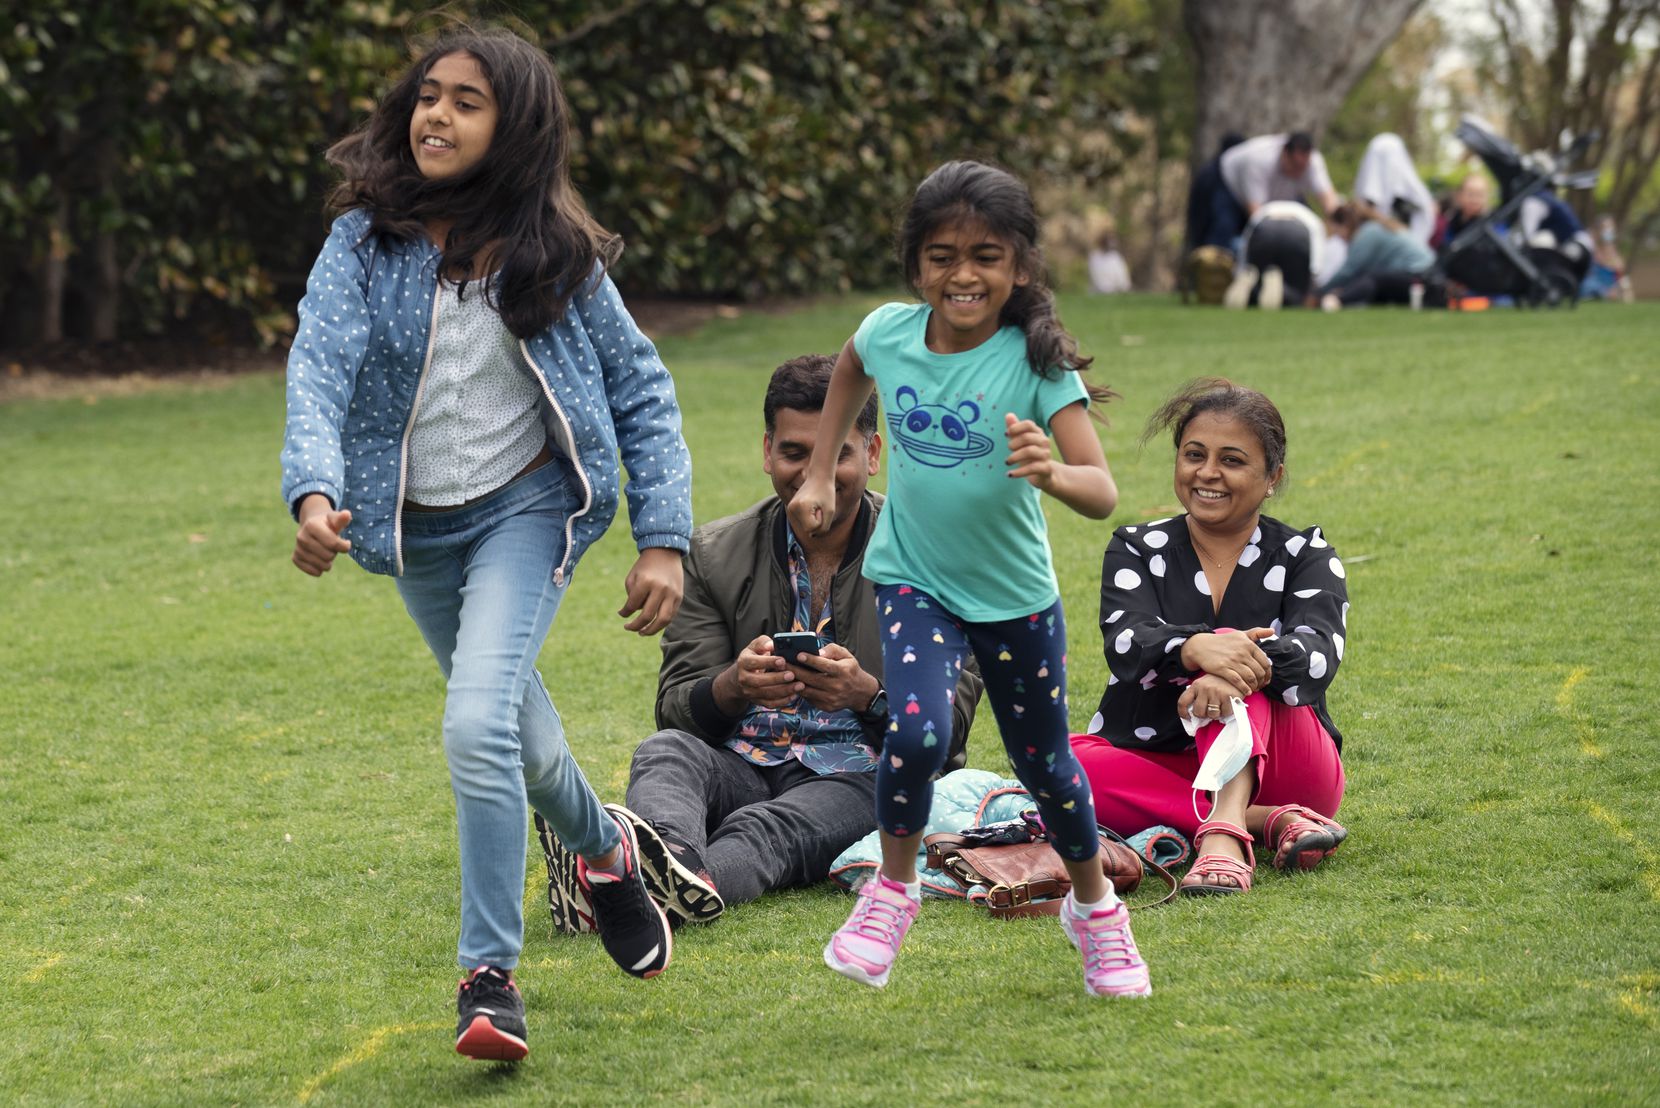 Shriya Achalia, 12, left, races with her sister Navya Achalia, 7, both of Austin, during a visit at the Dallas Arboretum for Easter weekend, on Saturday, April 03, 2021 in Dallas. The Achalia parents, Sudeep, left, and his wife Maithry, visited Dallas for the long Easter weekend to show Shriya her birth city of Plano while making several stops along the way to familiar and new sights they haven't been too in years.